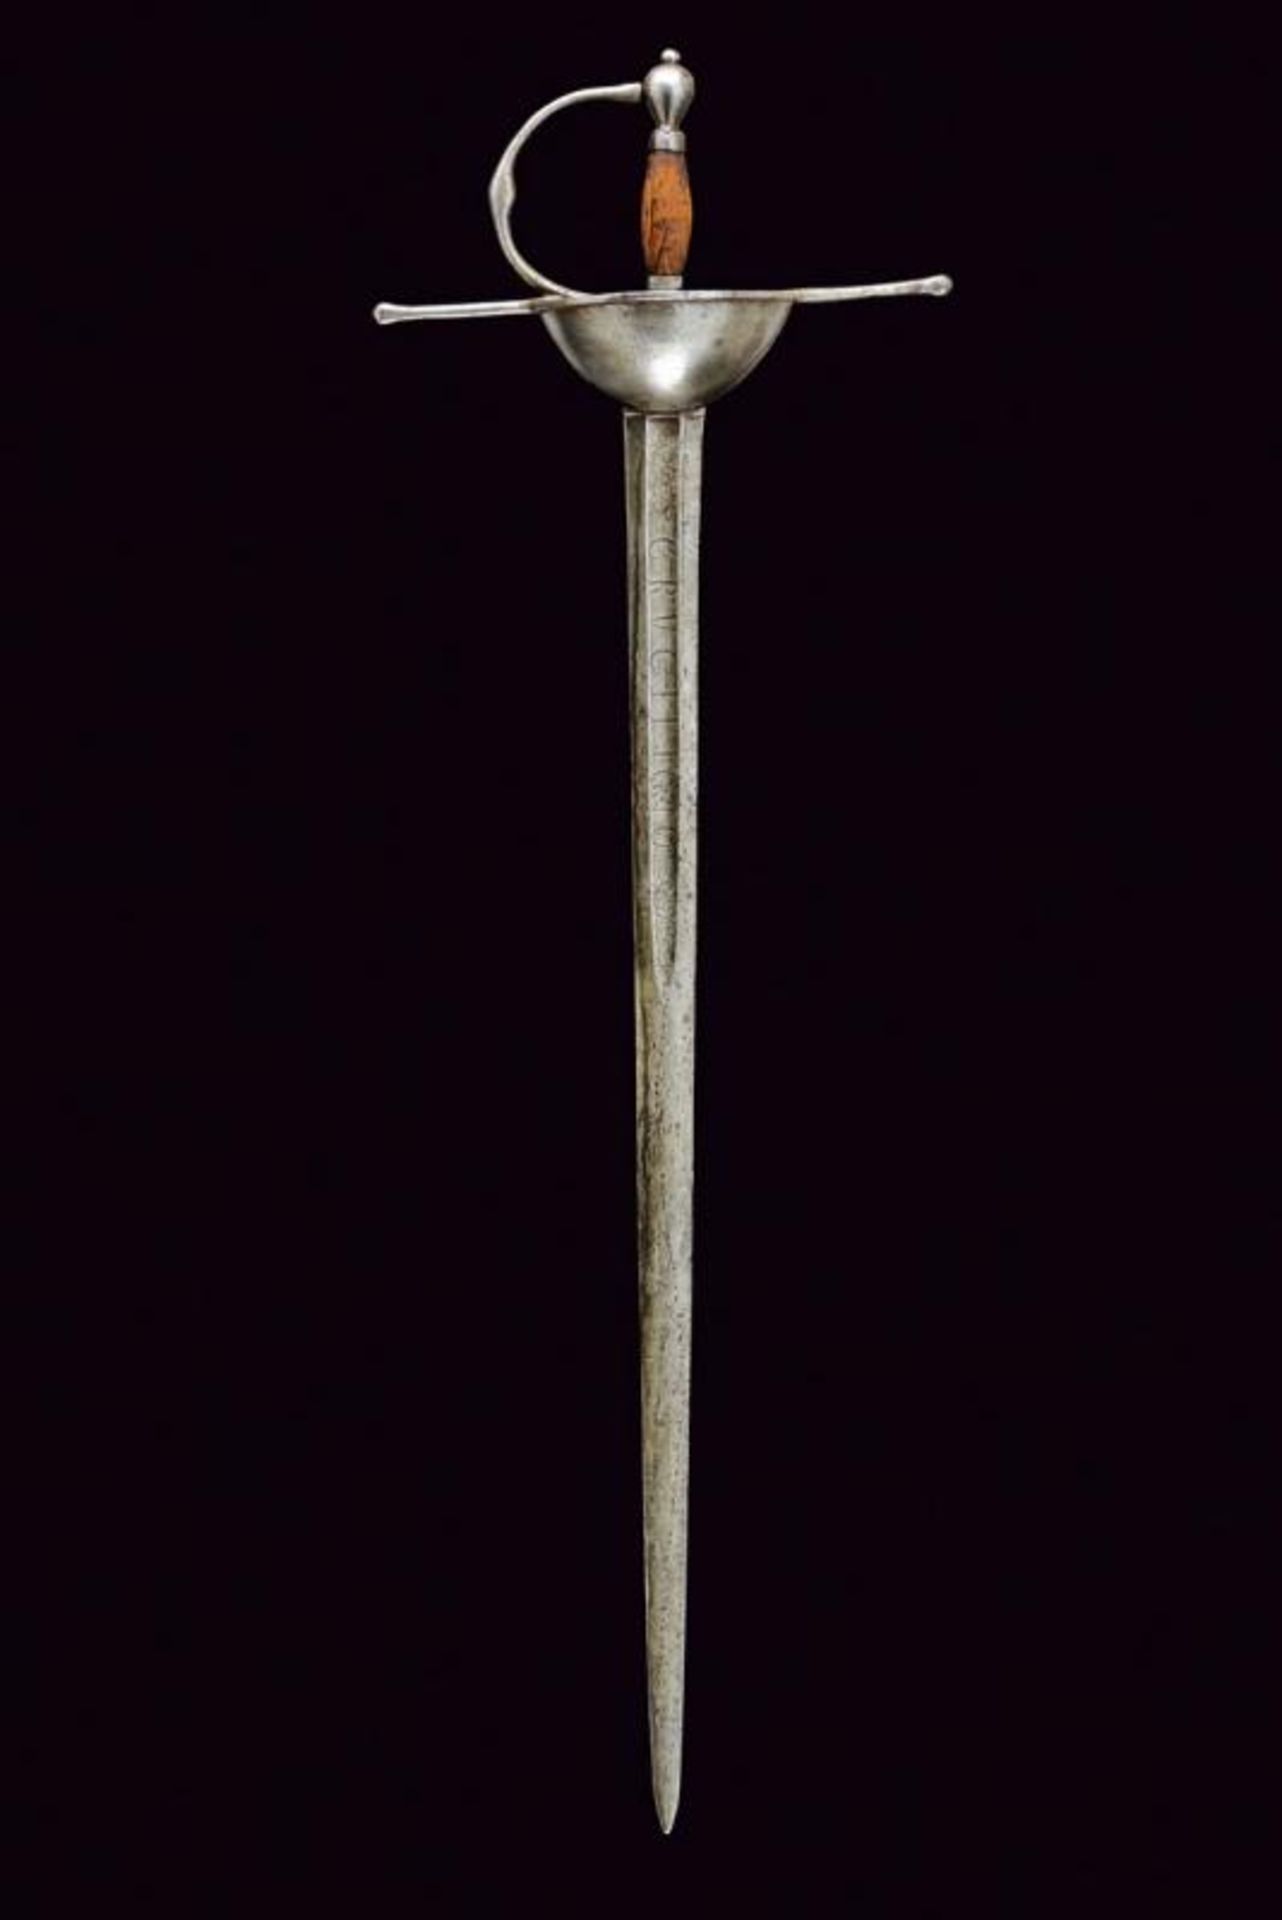 A cup hilted sword - Image 5 of 5